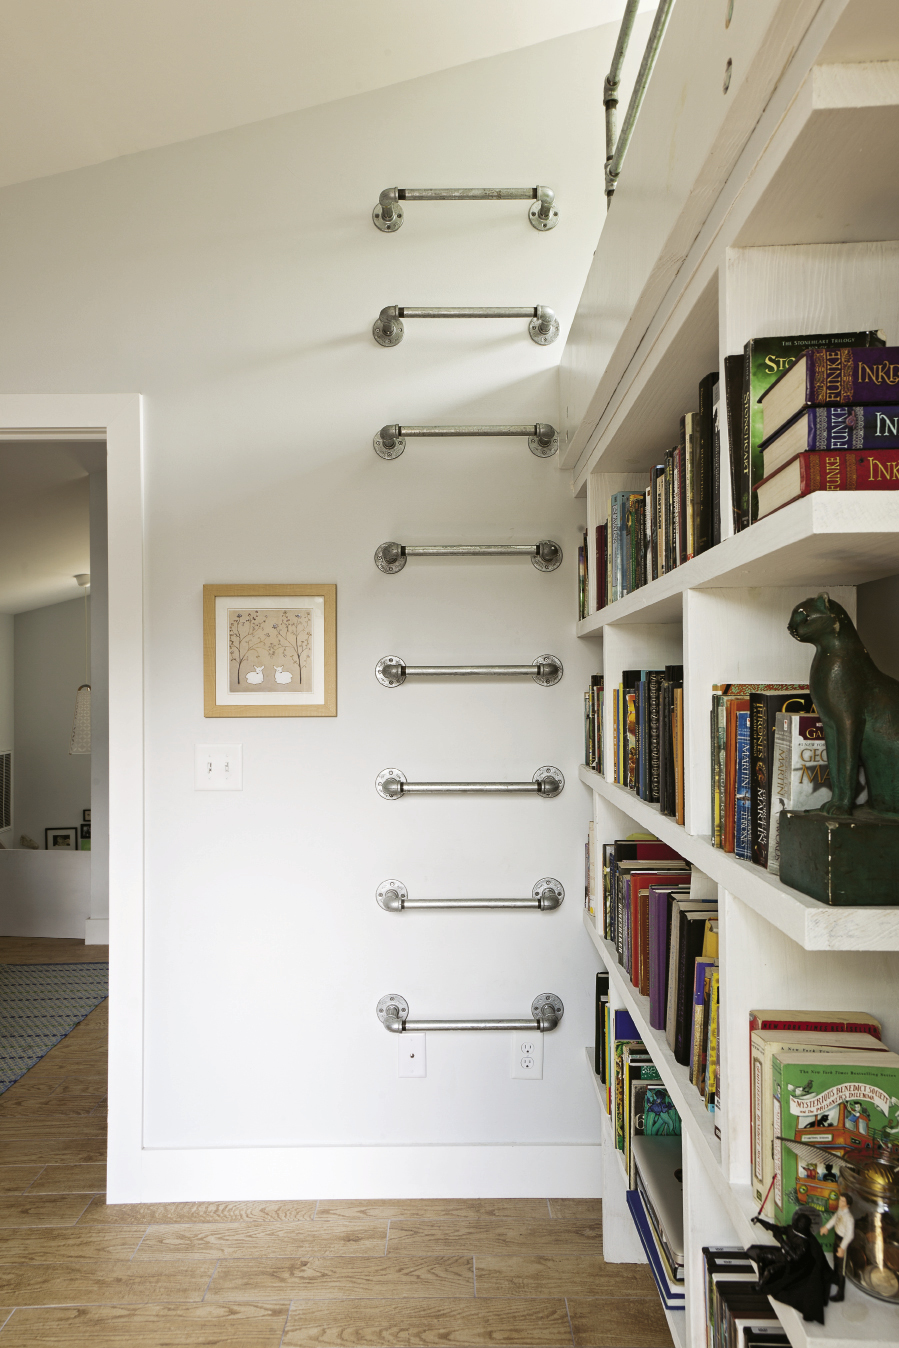 Wall-mounted ladders made of galvanized pipe are also space efficient.